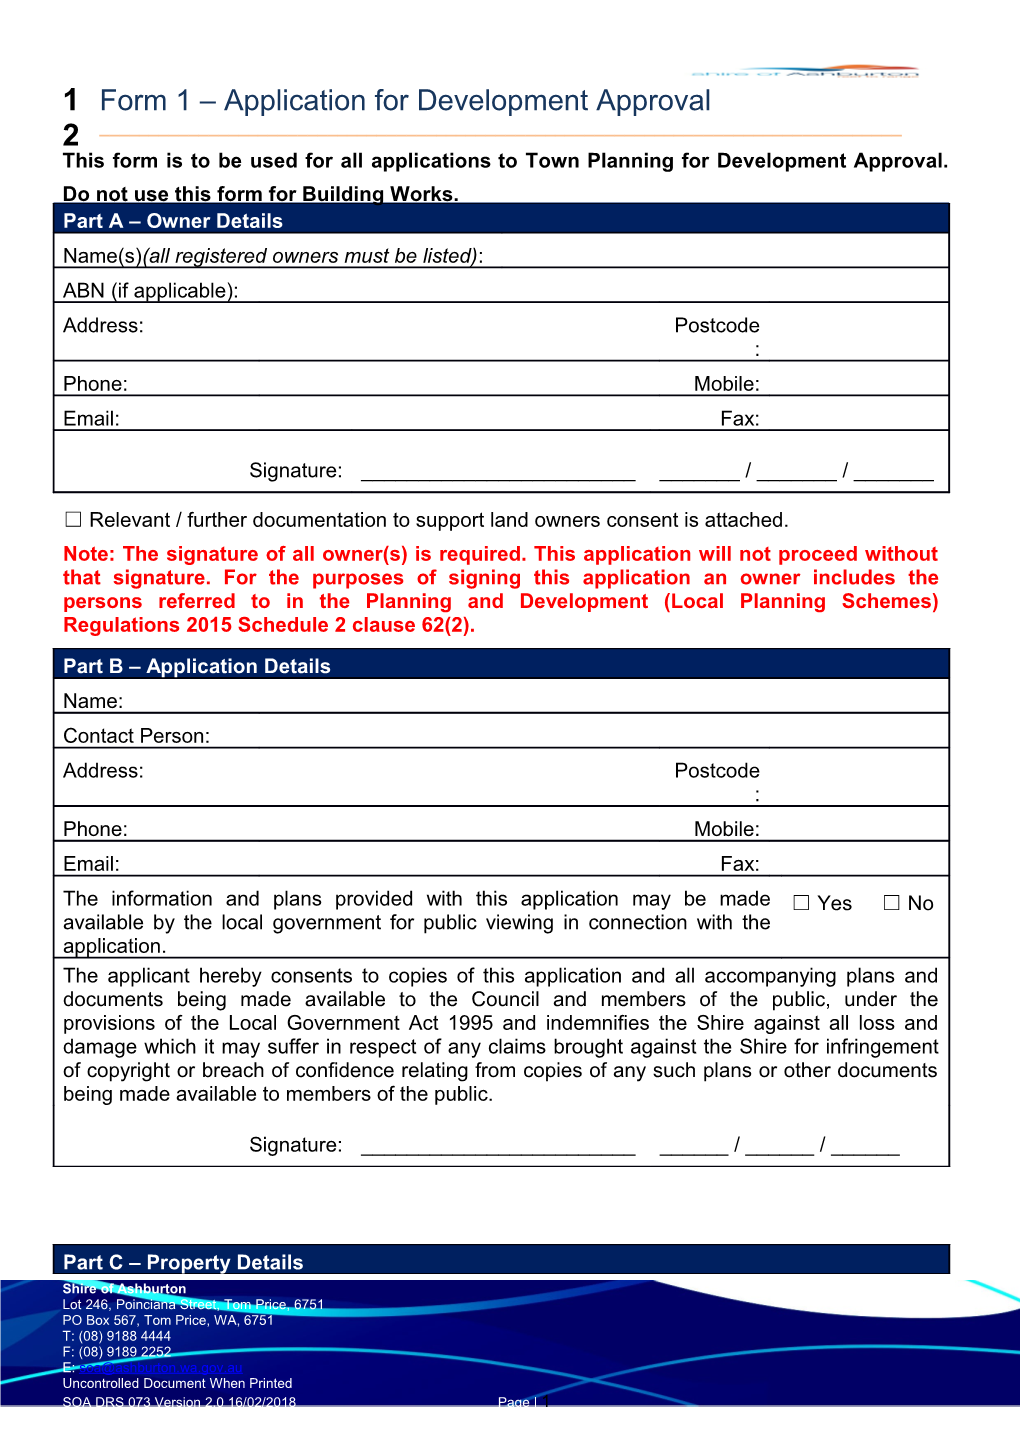 Form 1 Application for Development Approval